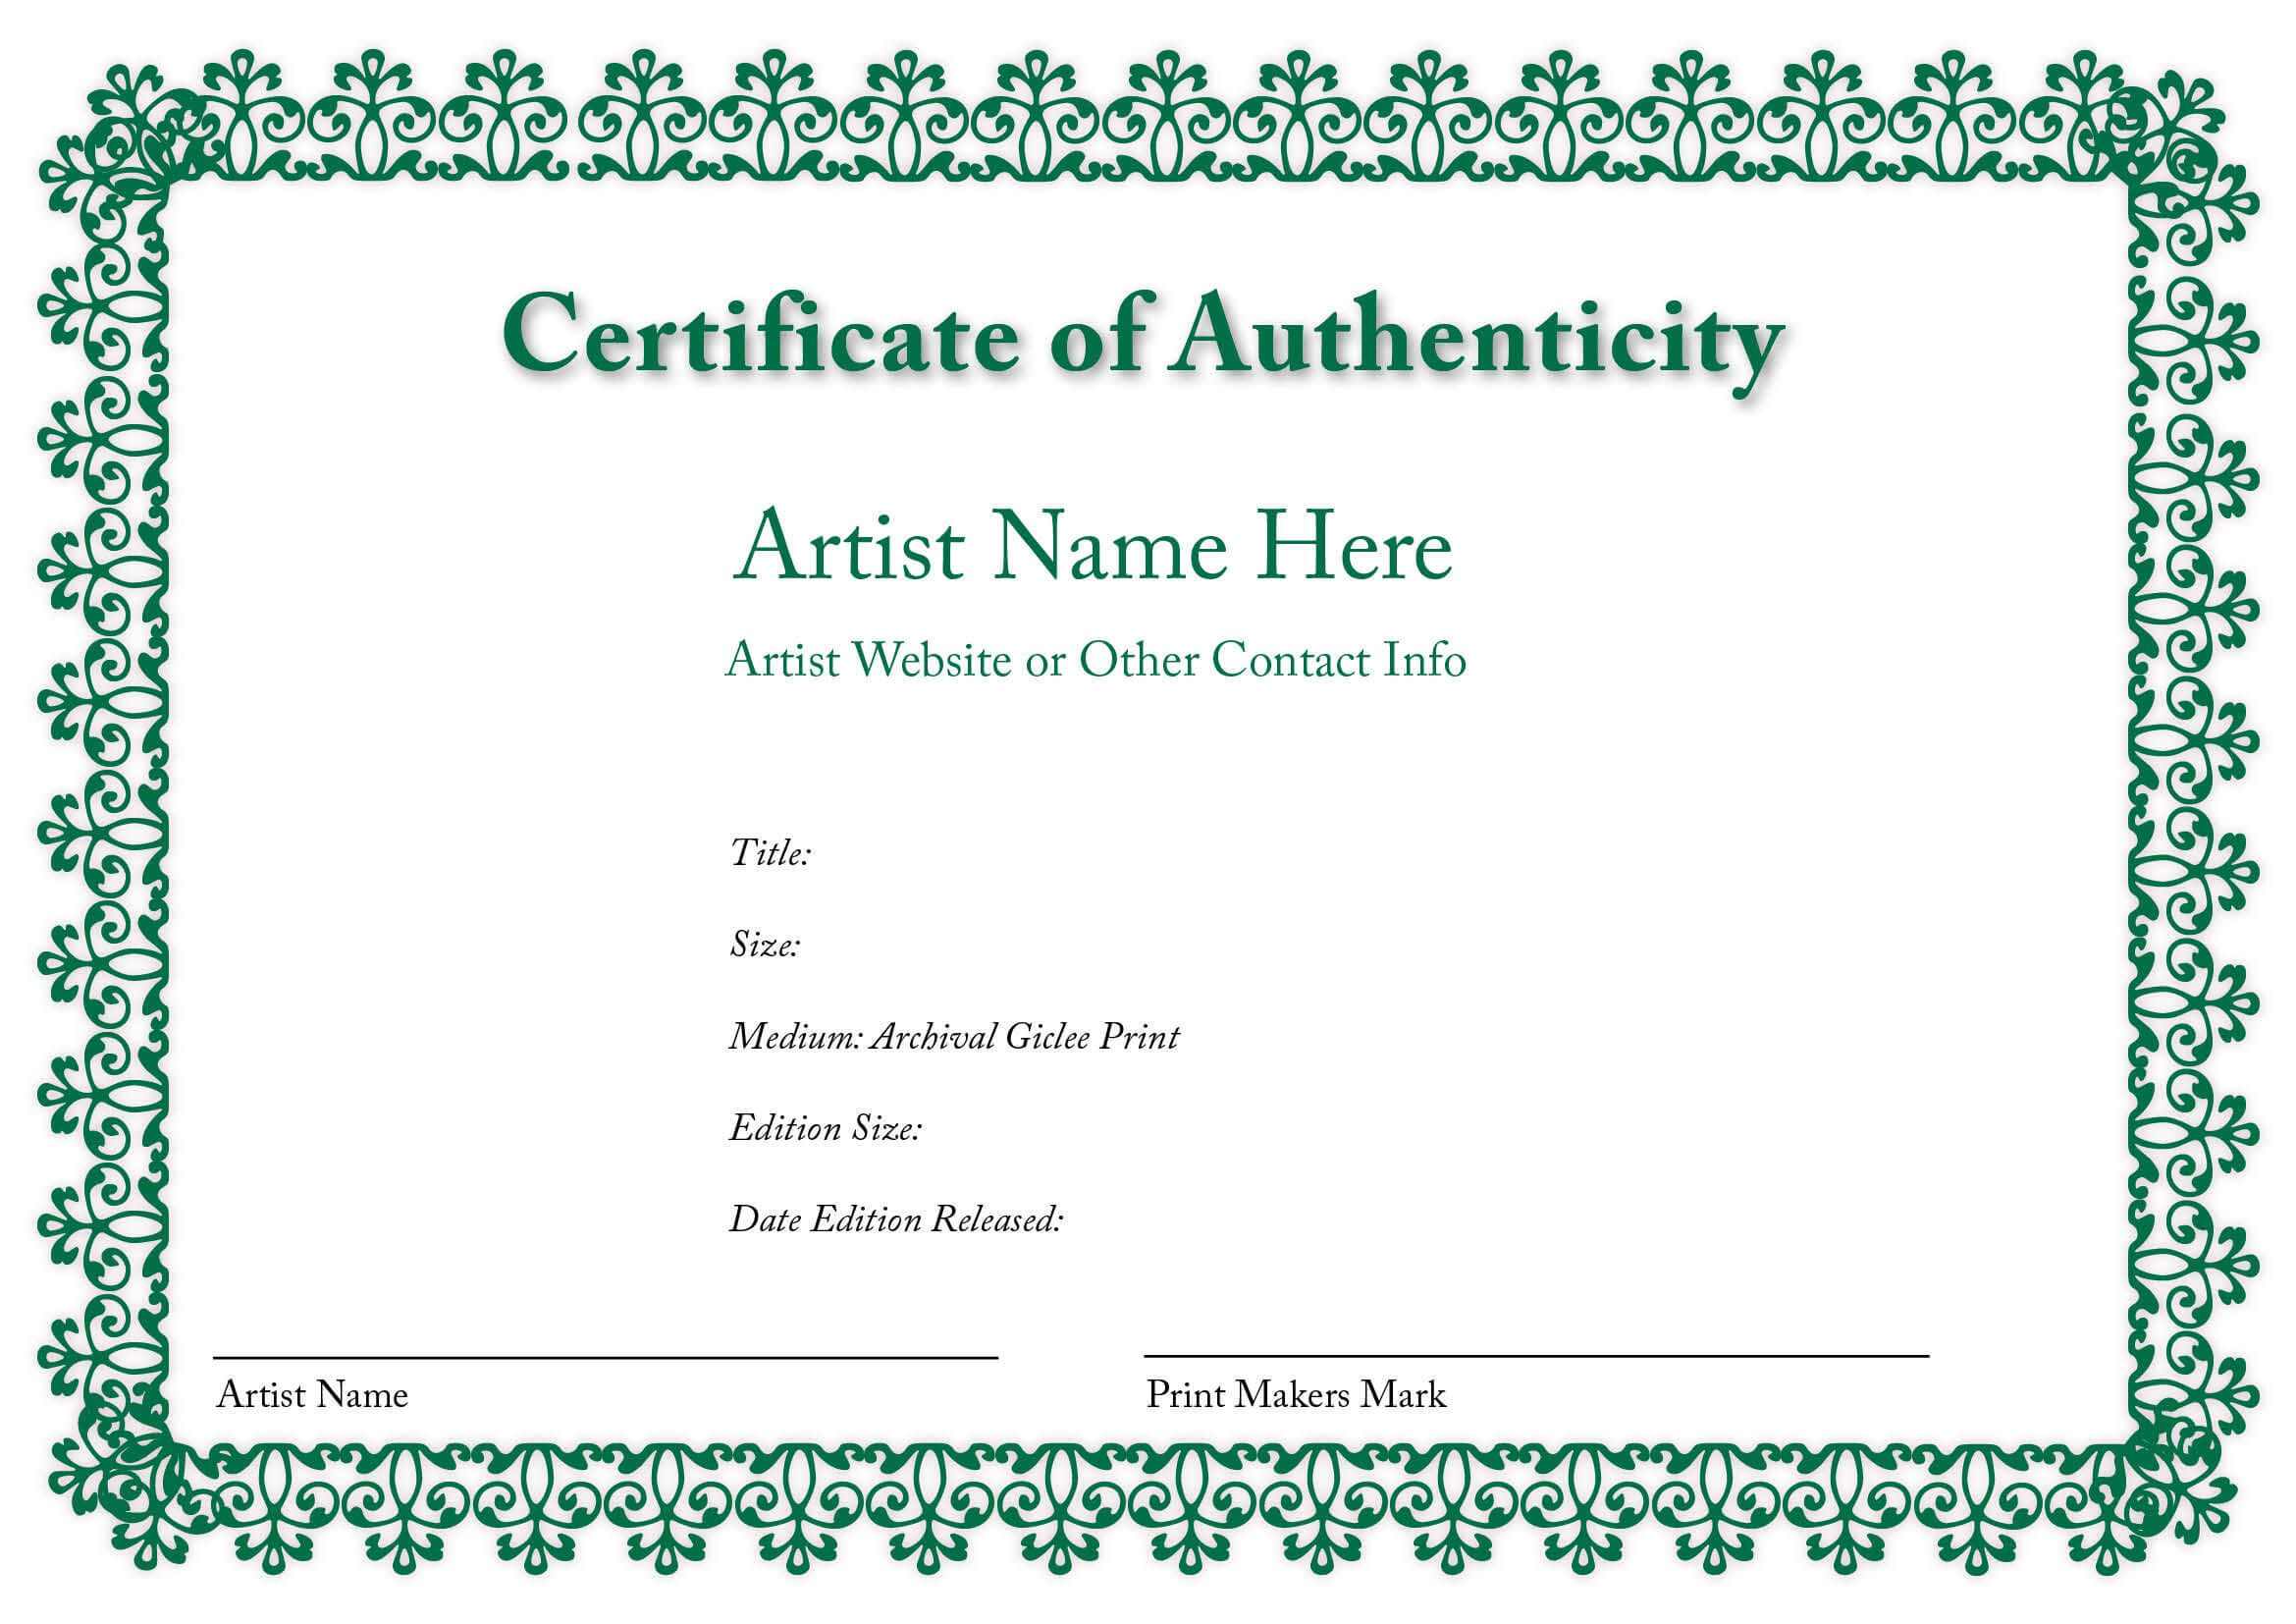 Certificate Of Authenticity Of An Art Print | Lettering Pertaining To Certificate Of Authenticity Template